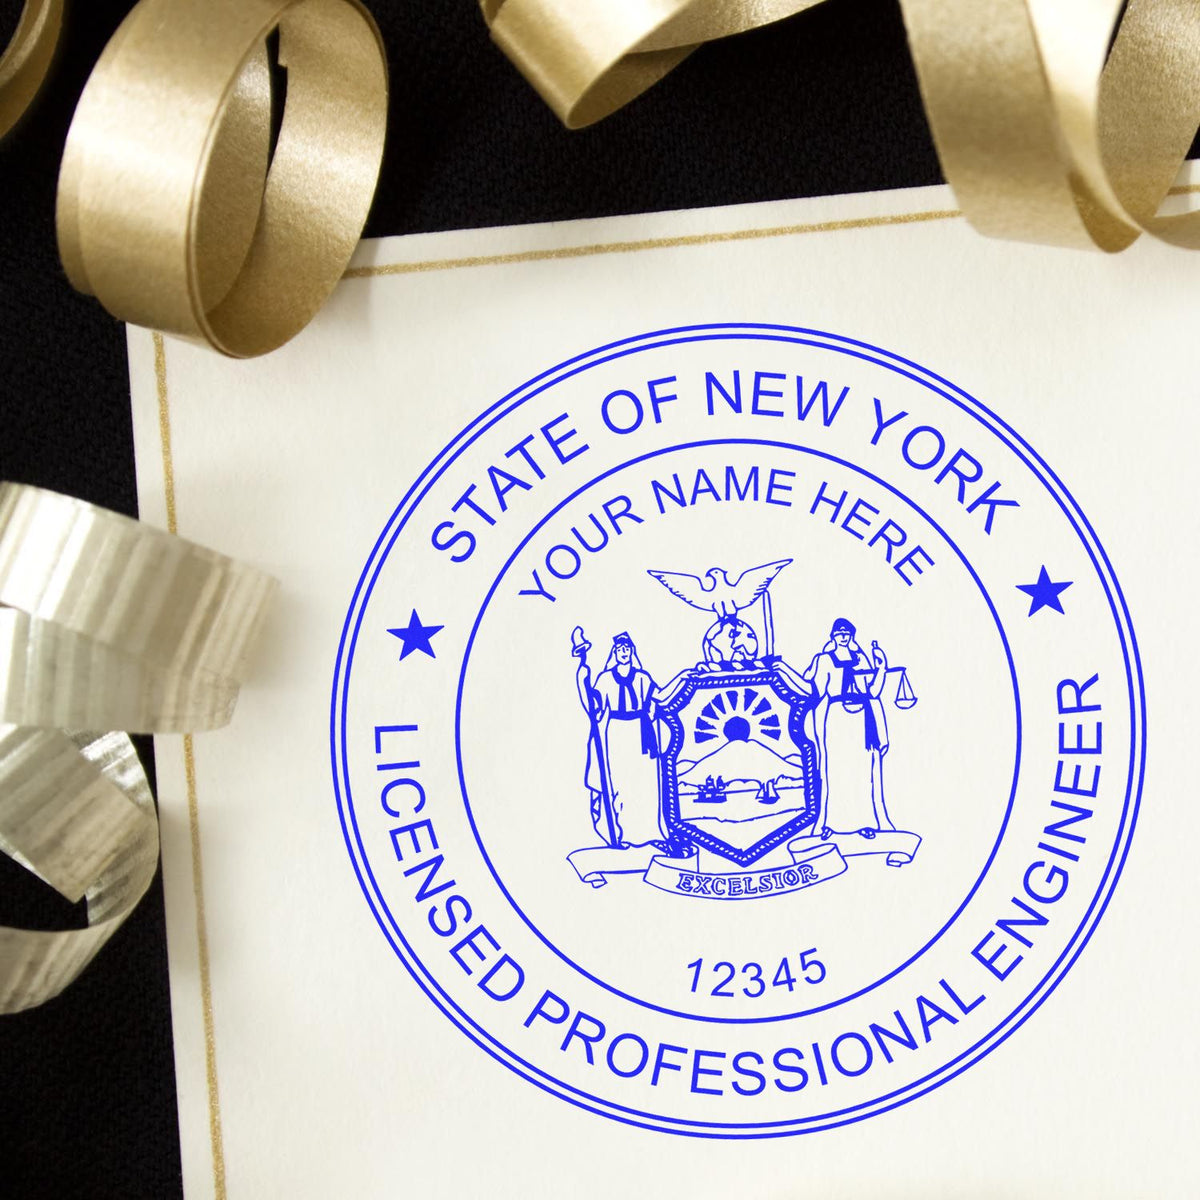 An alternative view of the New York Professional Engineer Seal Stamp stamped on a sheet of paper showing the image in use